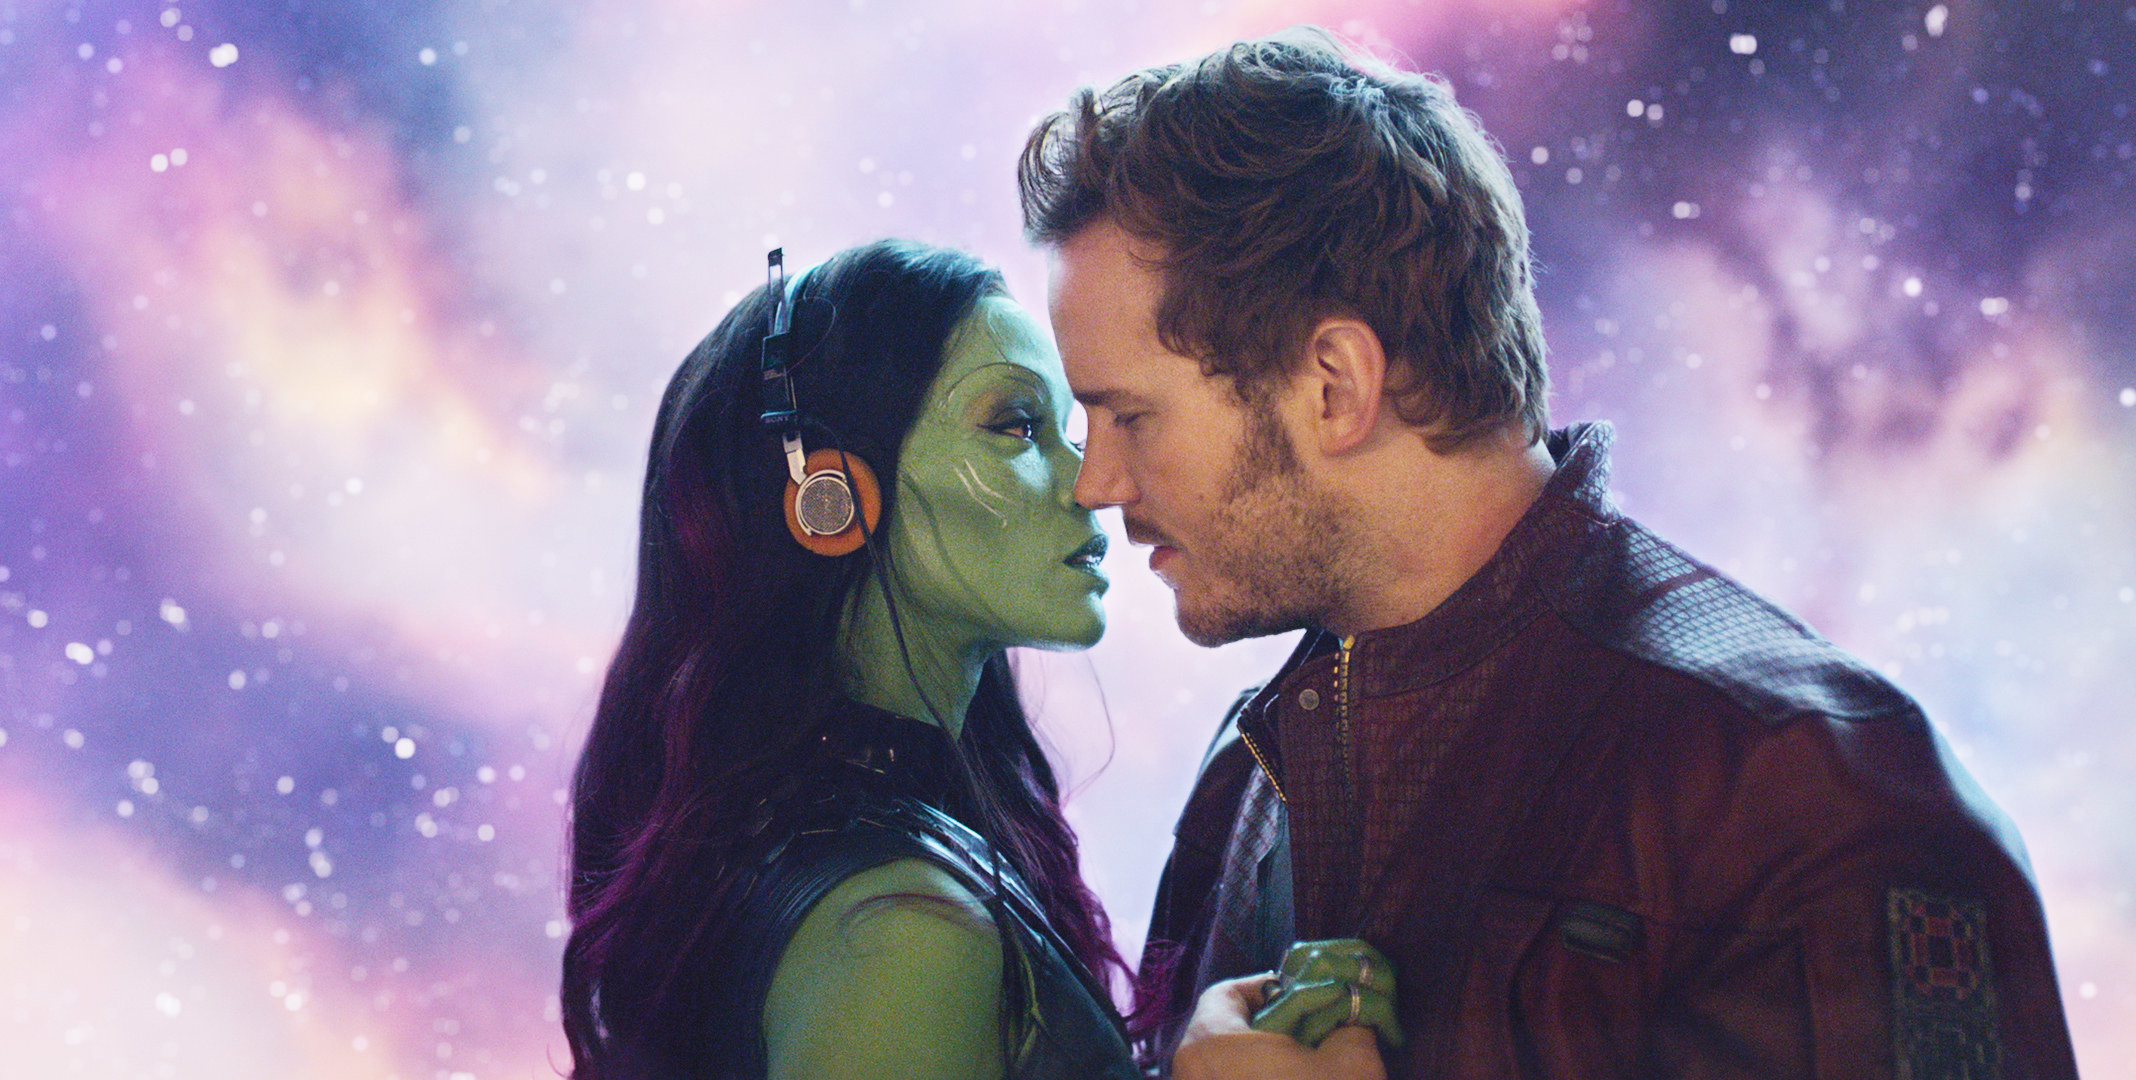 Peter and Gamora moving in for a kiss